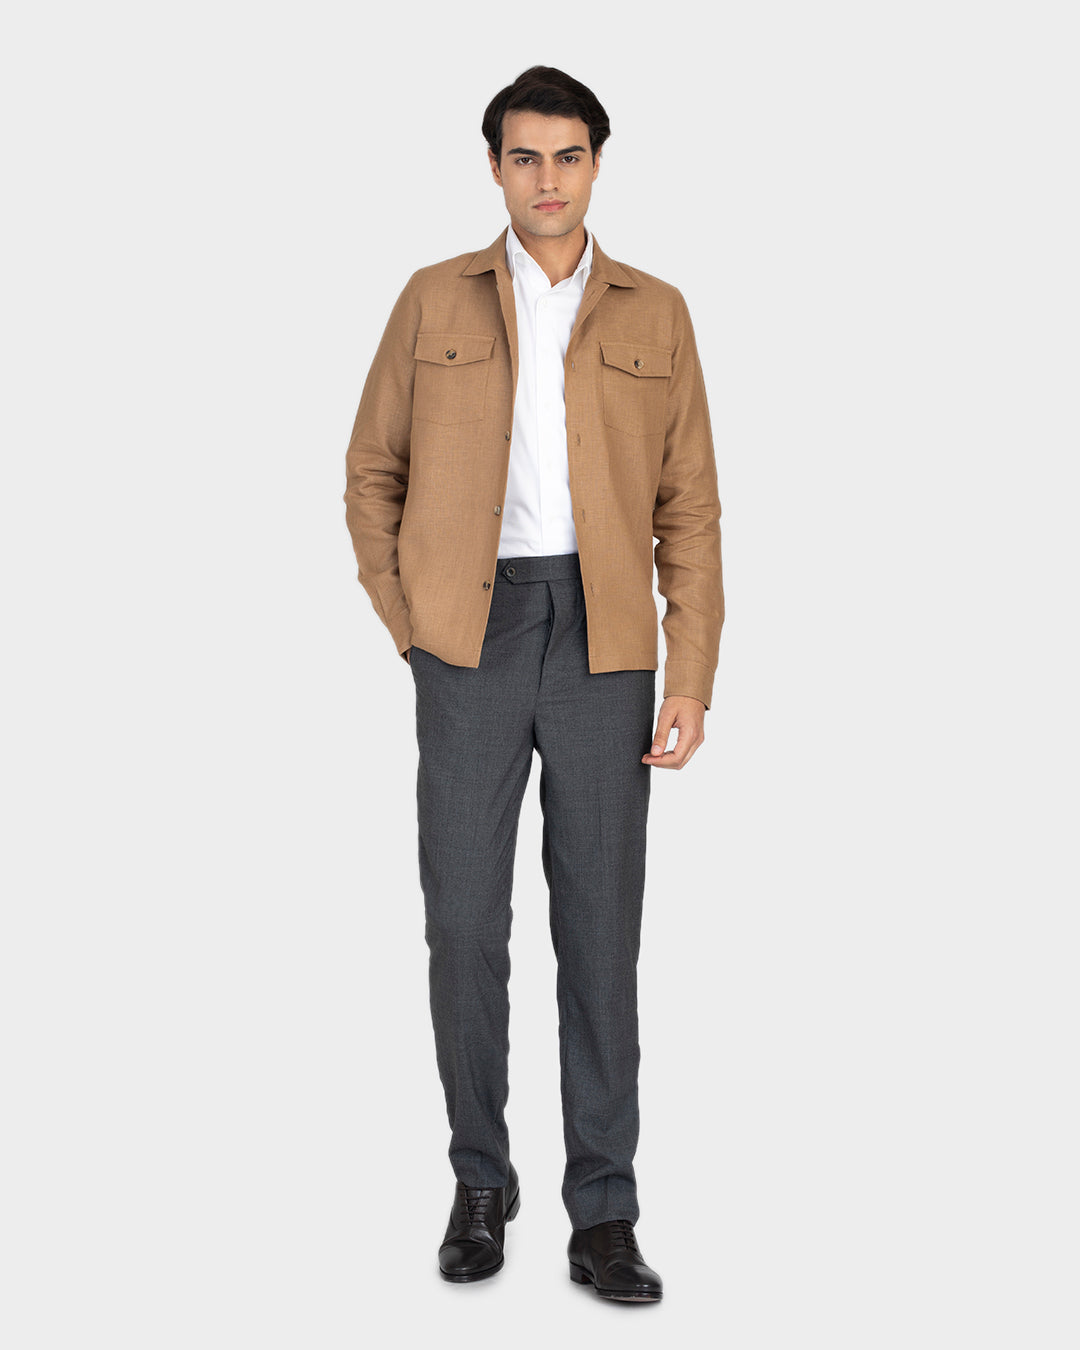 Front of model wearing the linen shirt jacket for men by Luxire in golden brown